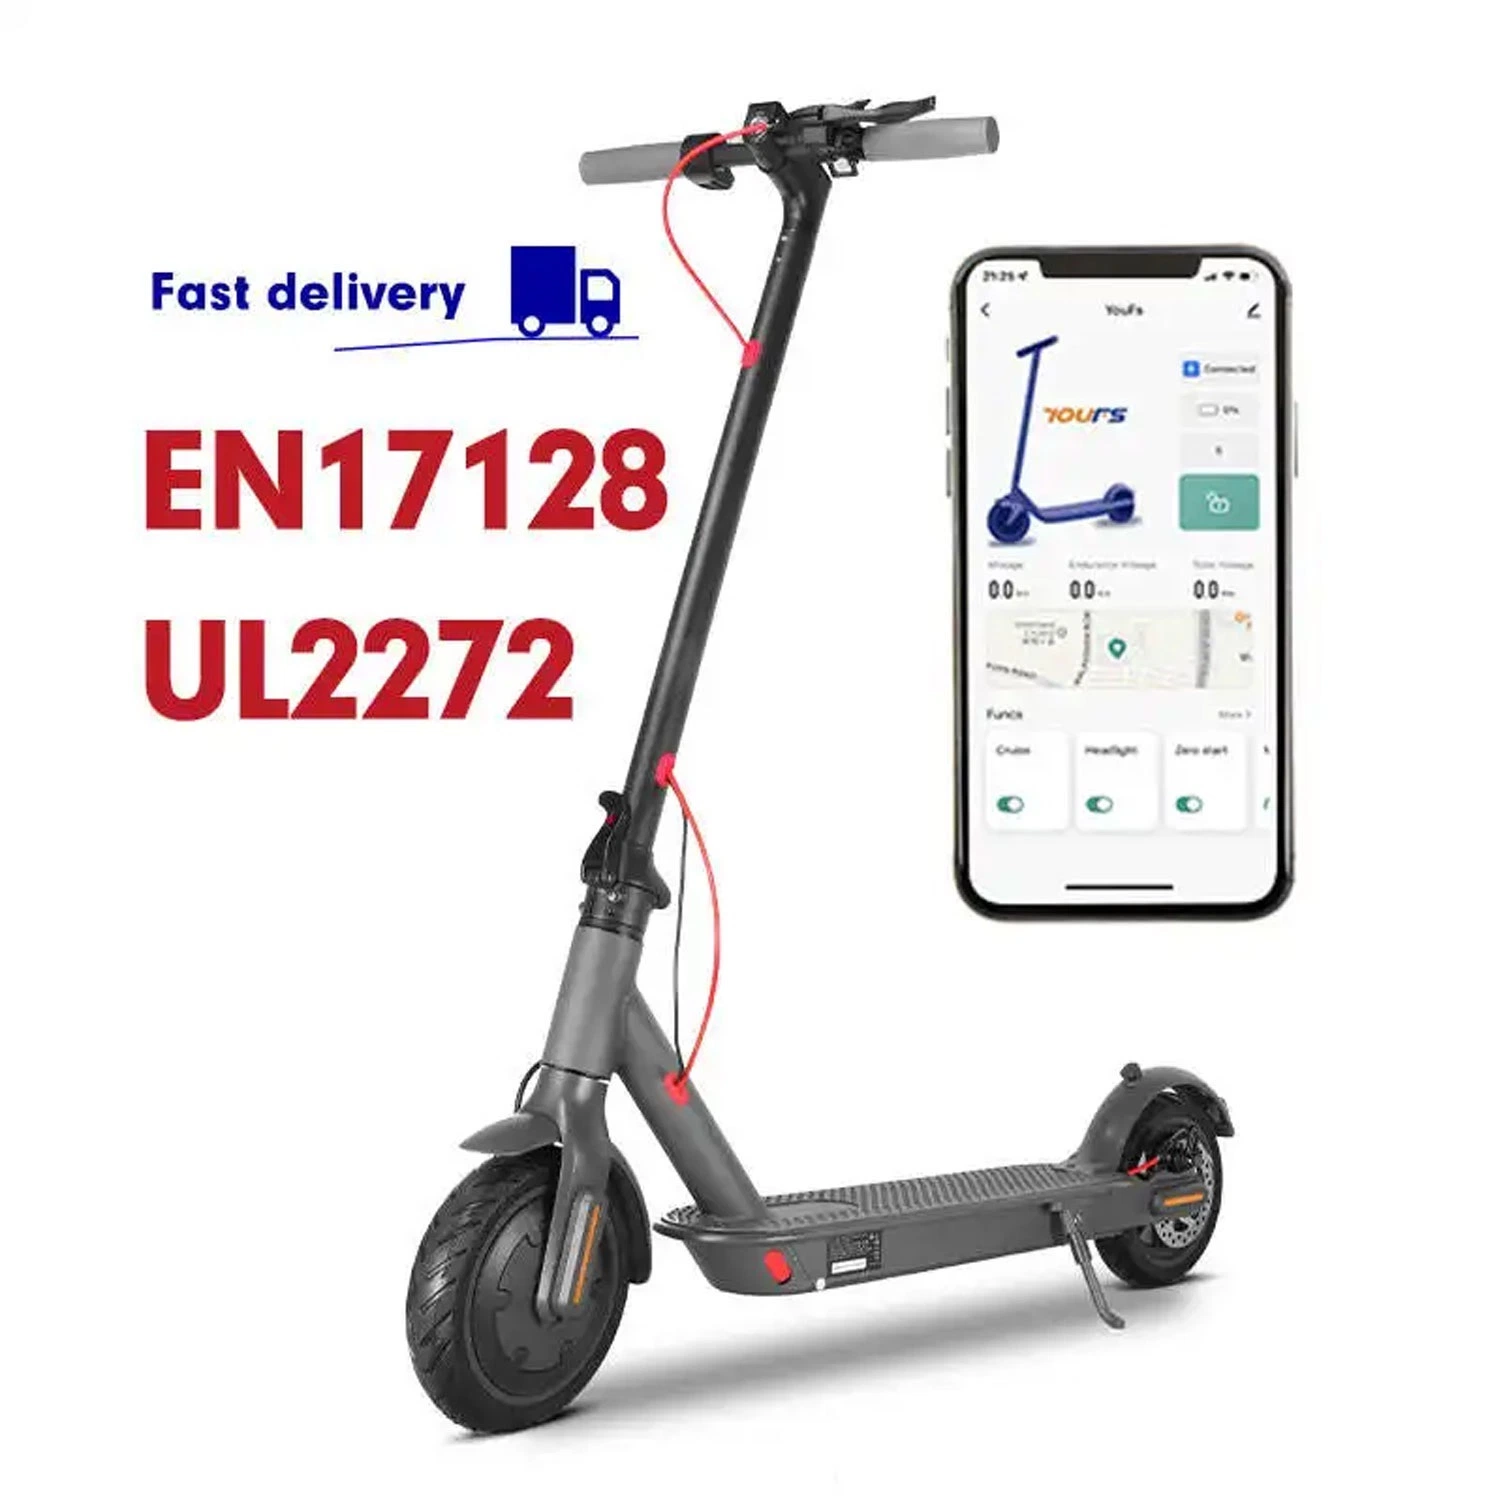 USA Poland Germany Warehouse Drop Ship IP65 8.5inch 350W Wheel Folding Kick Electric Scooter with CE Portable Commuting E-Scooter for Adult